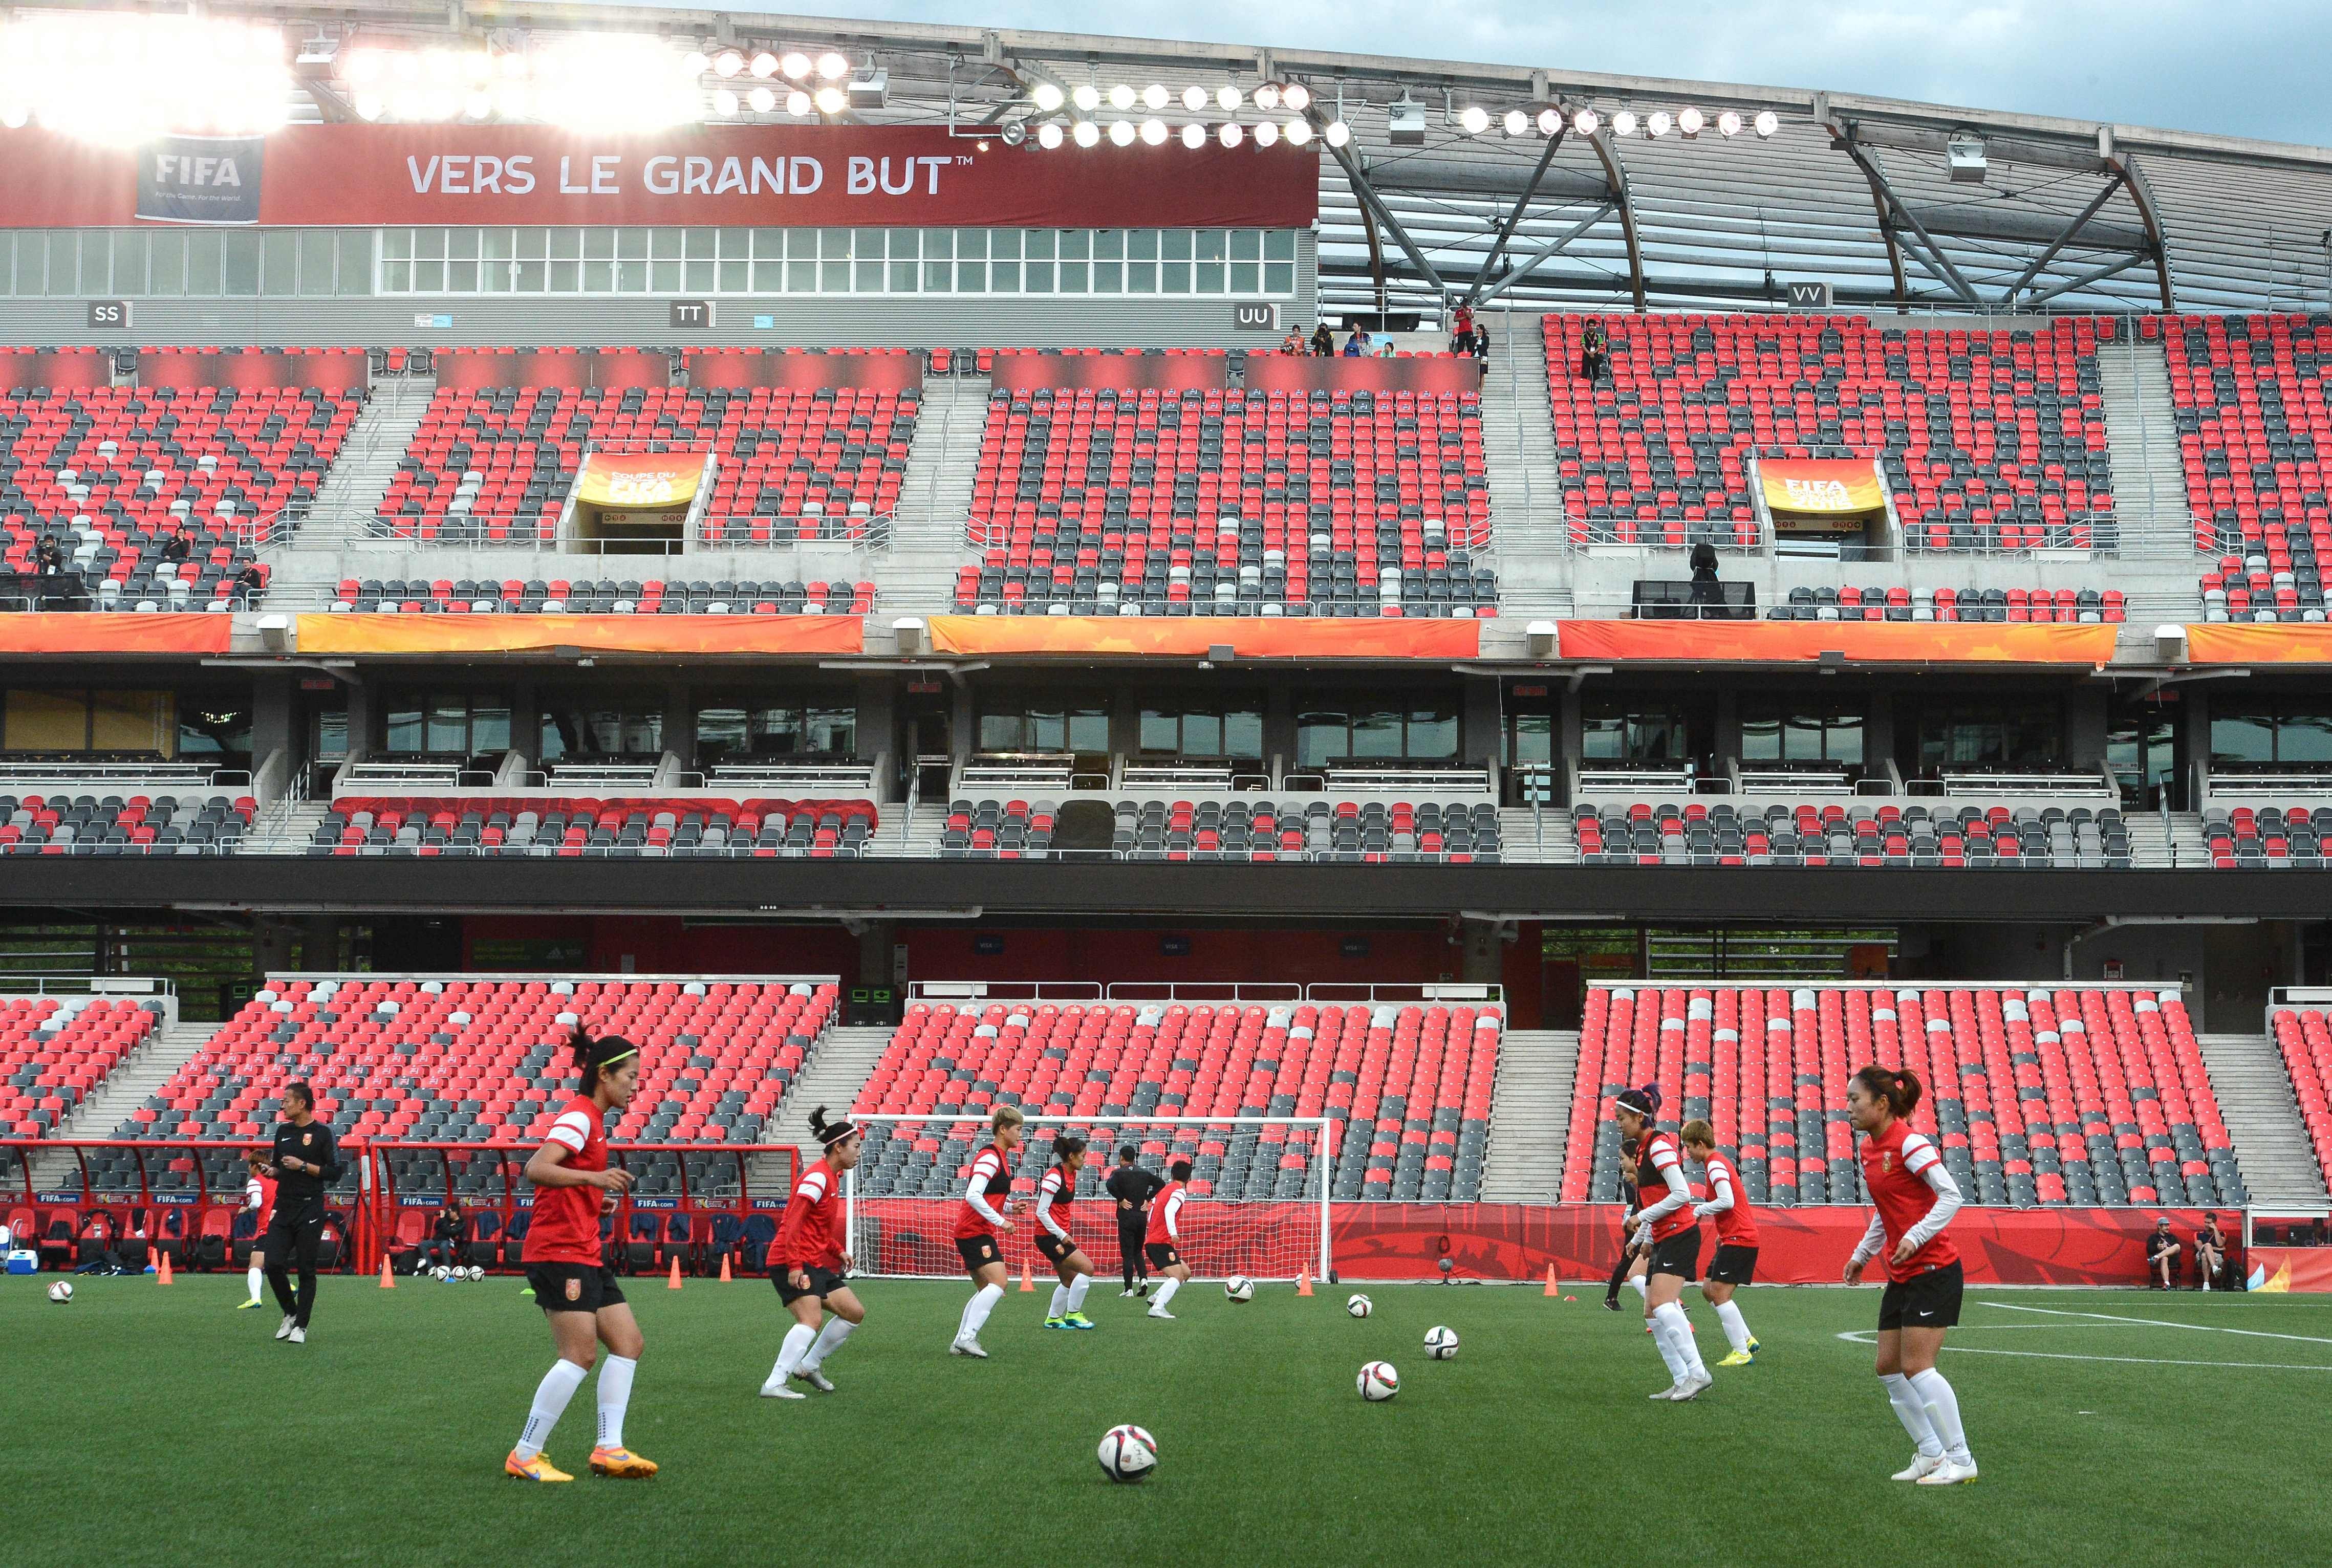 Members of China's national team take part in a training session at Lansdowne Stadium in Ottawa on June 25, 2015 on the eve of their 2015 FIFA Women's World Cup quarterfinal match against the US.